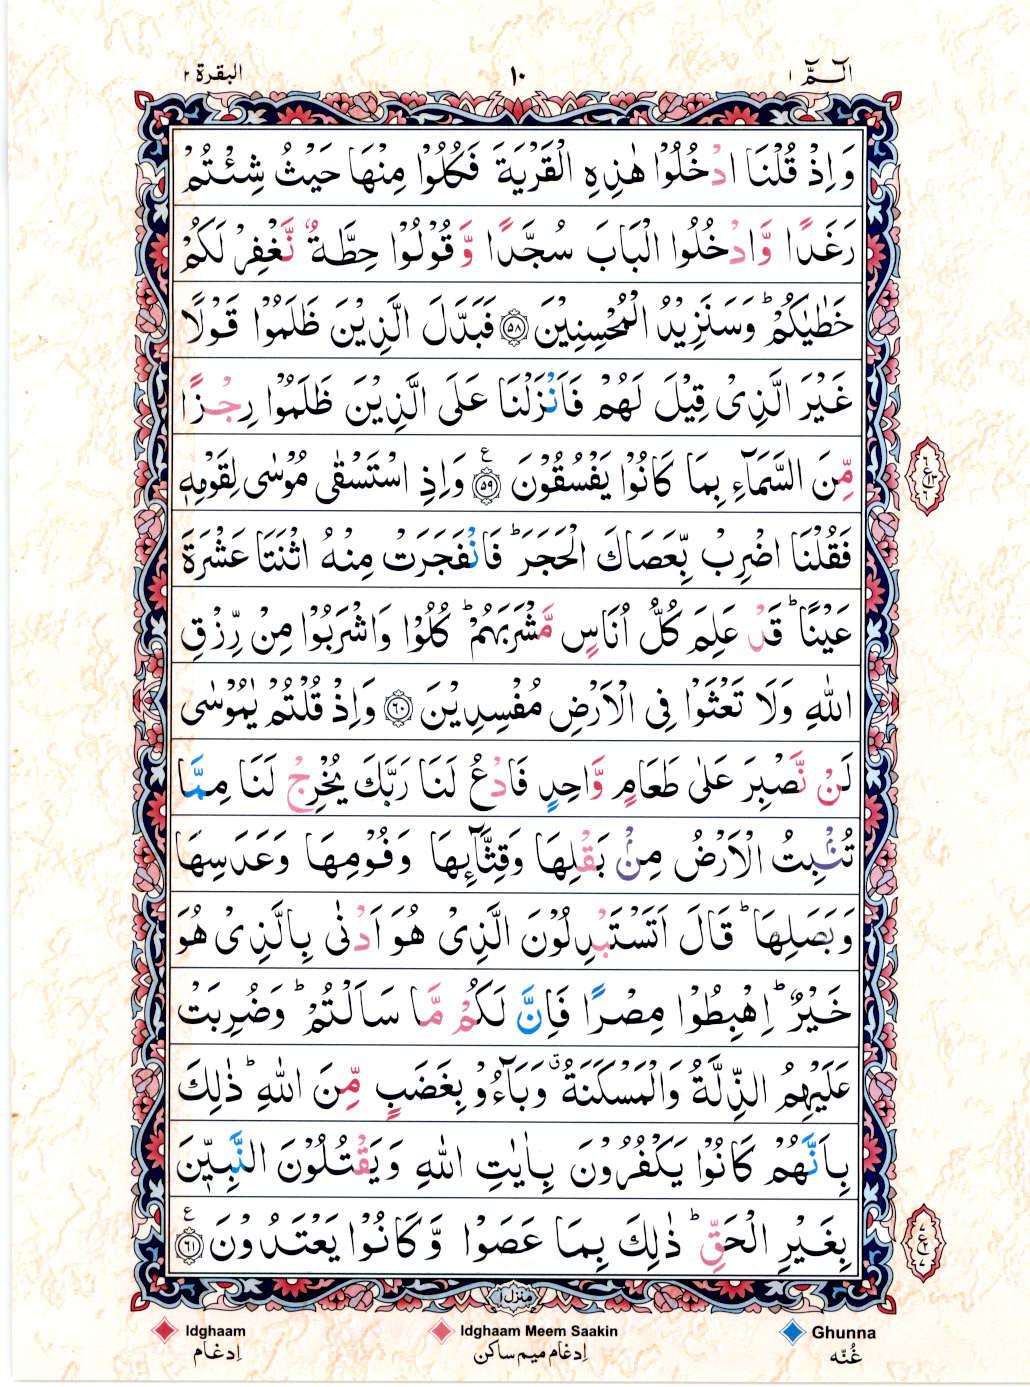 Read 15 Lines Coloured Coded Quran Part 1 Page No 10, Practice Quran